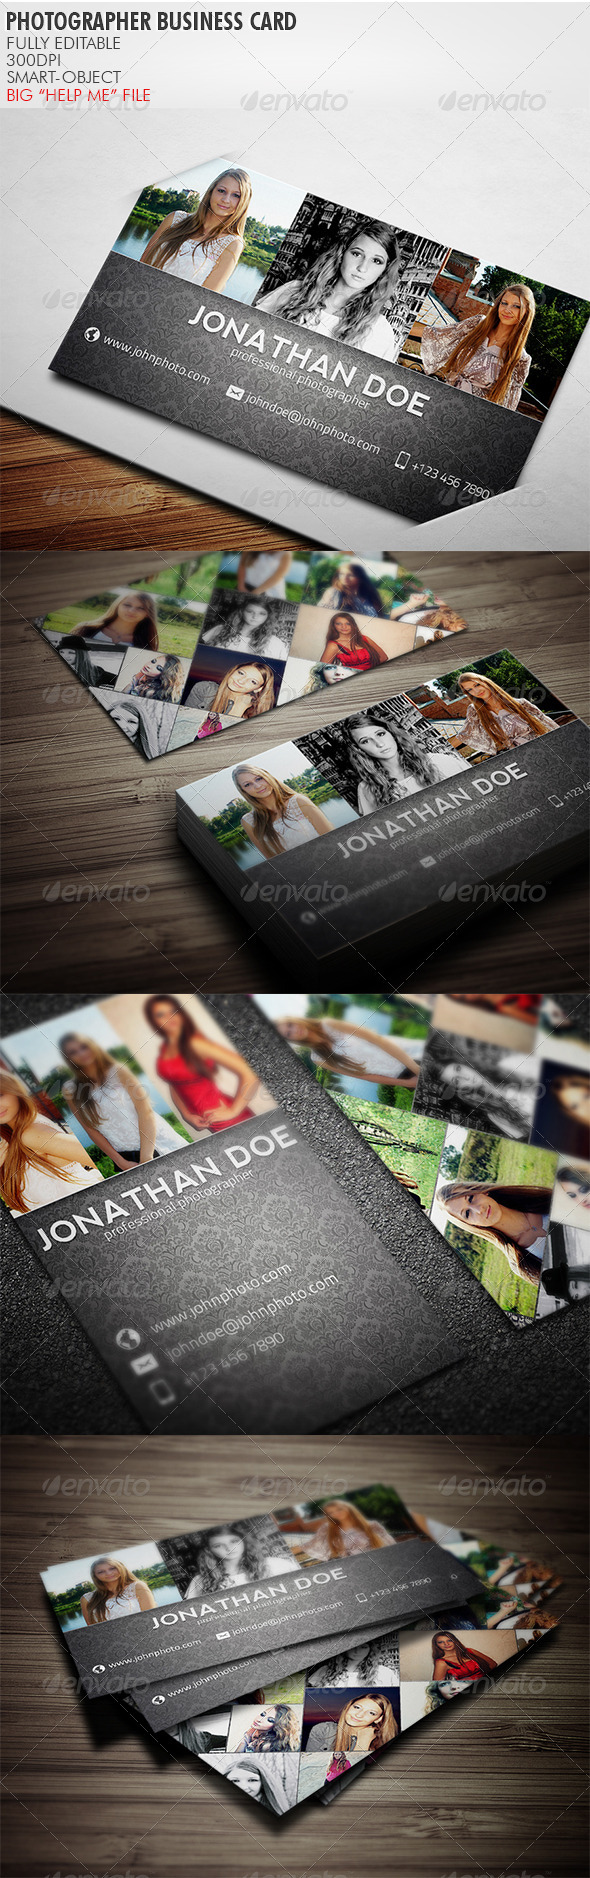 Photographer Business Card by Realstar | GraphicRiver